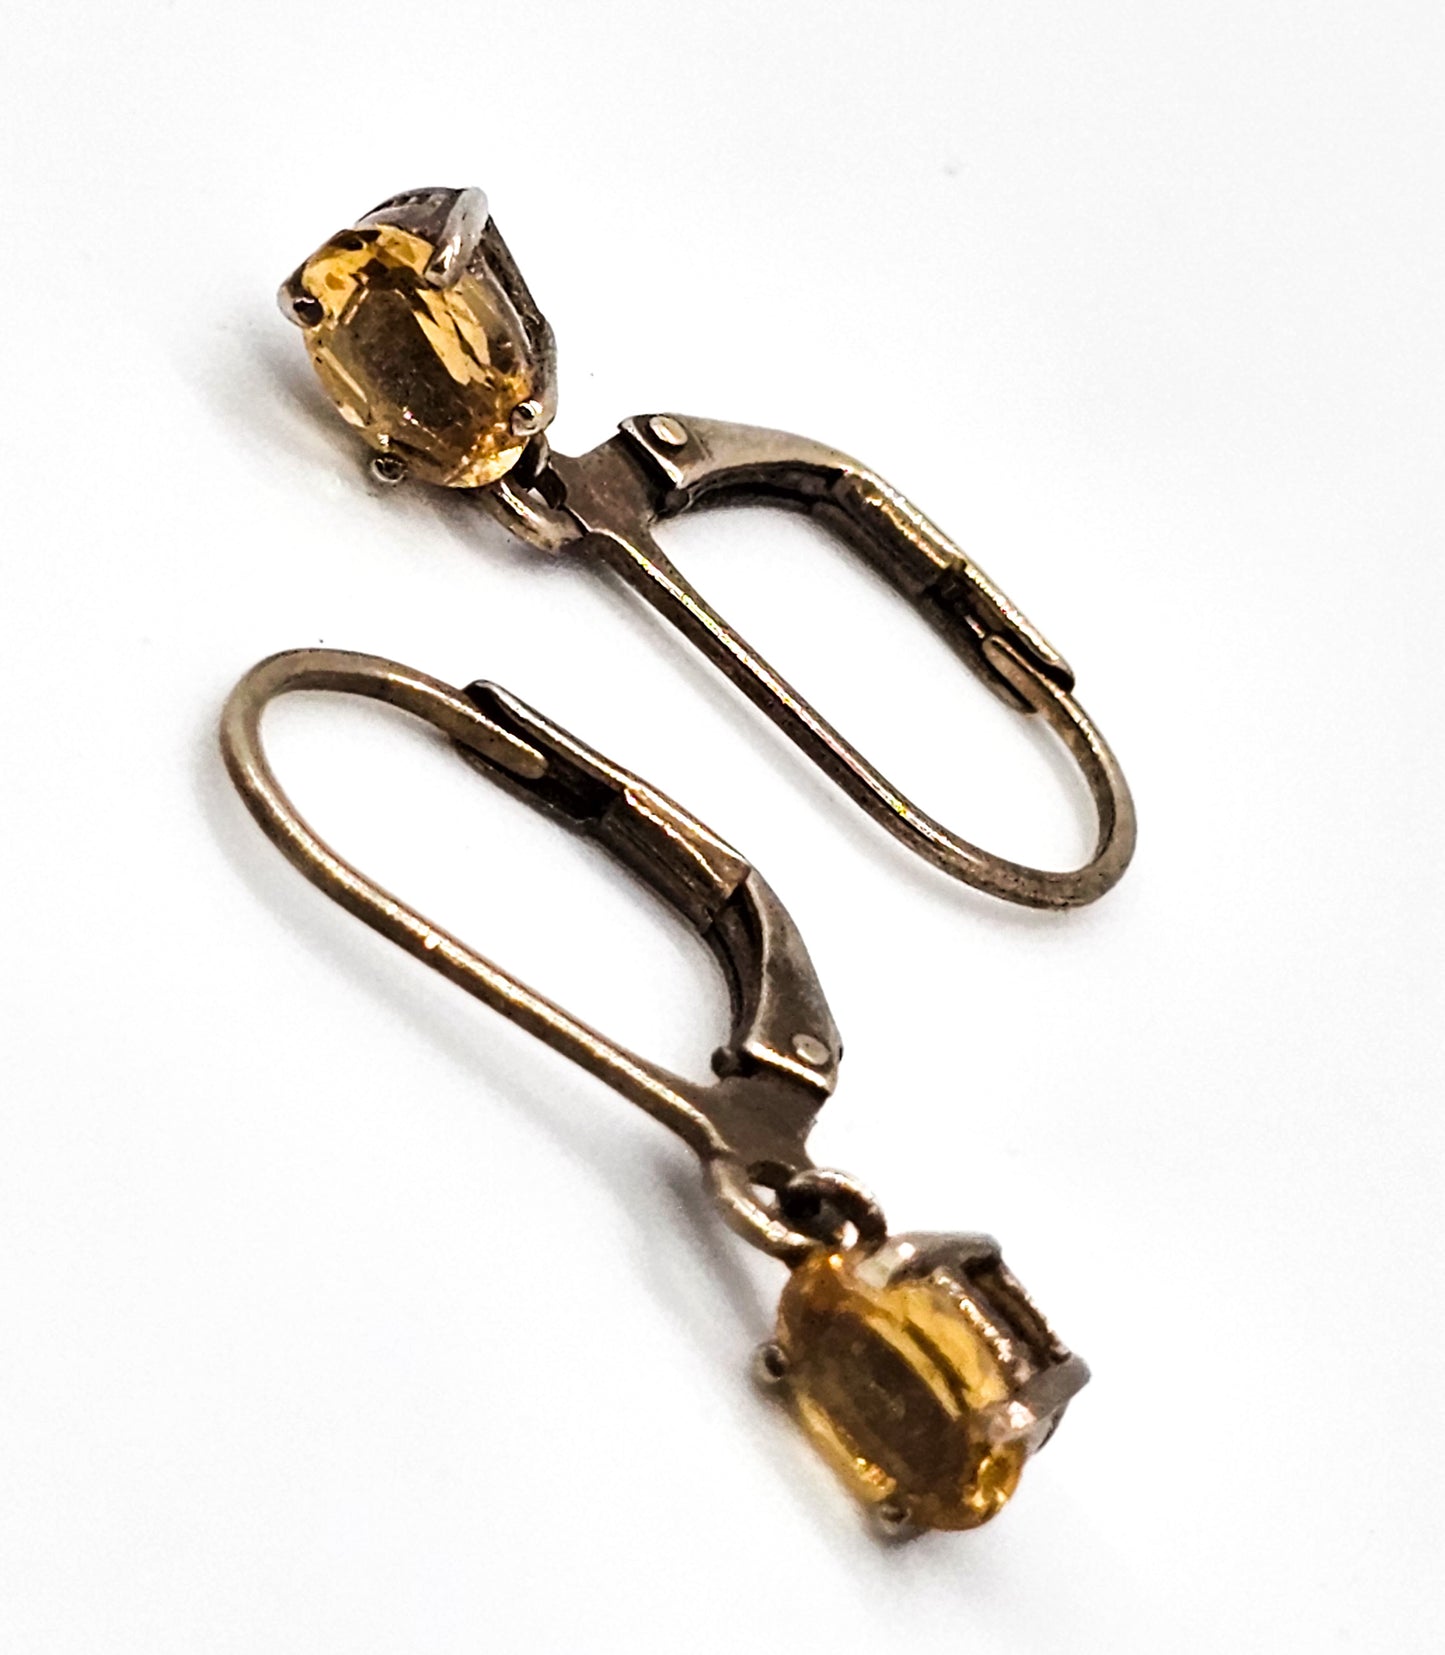 Lirm faceted drop yellow citrine gemstone vermeil gold over sterling silver vintage earrings